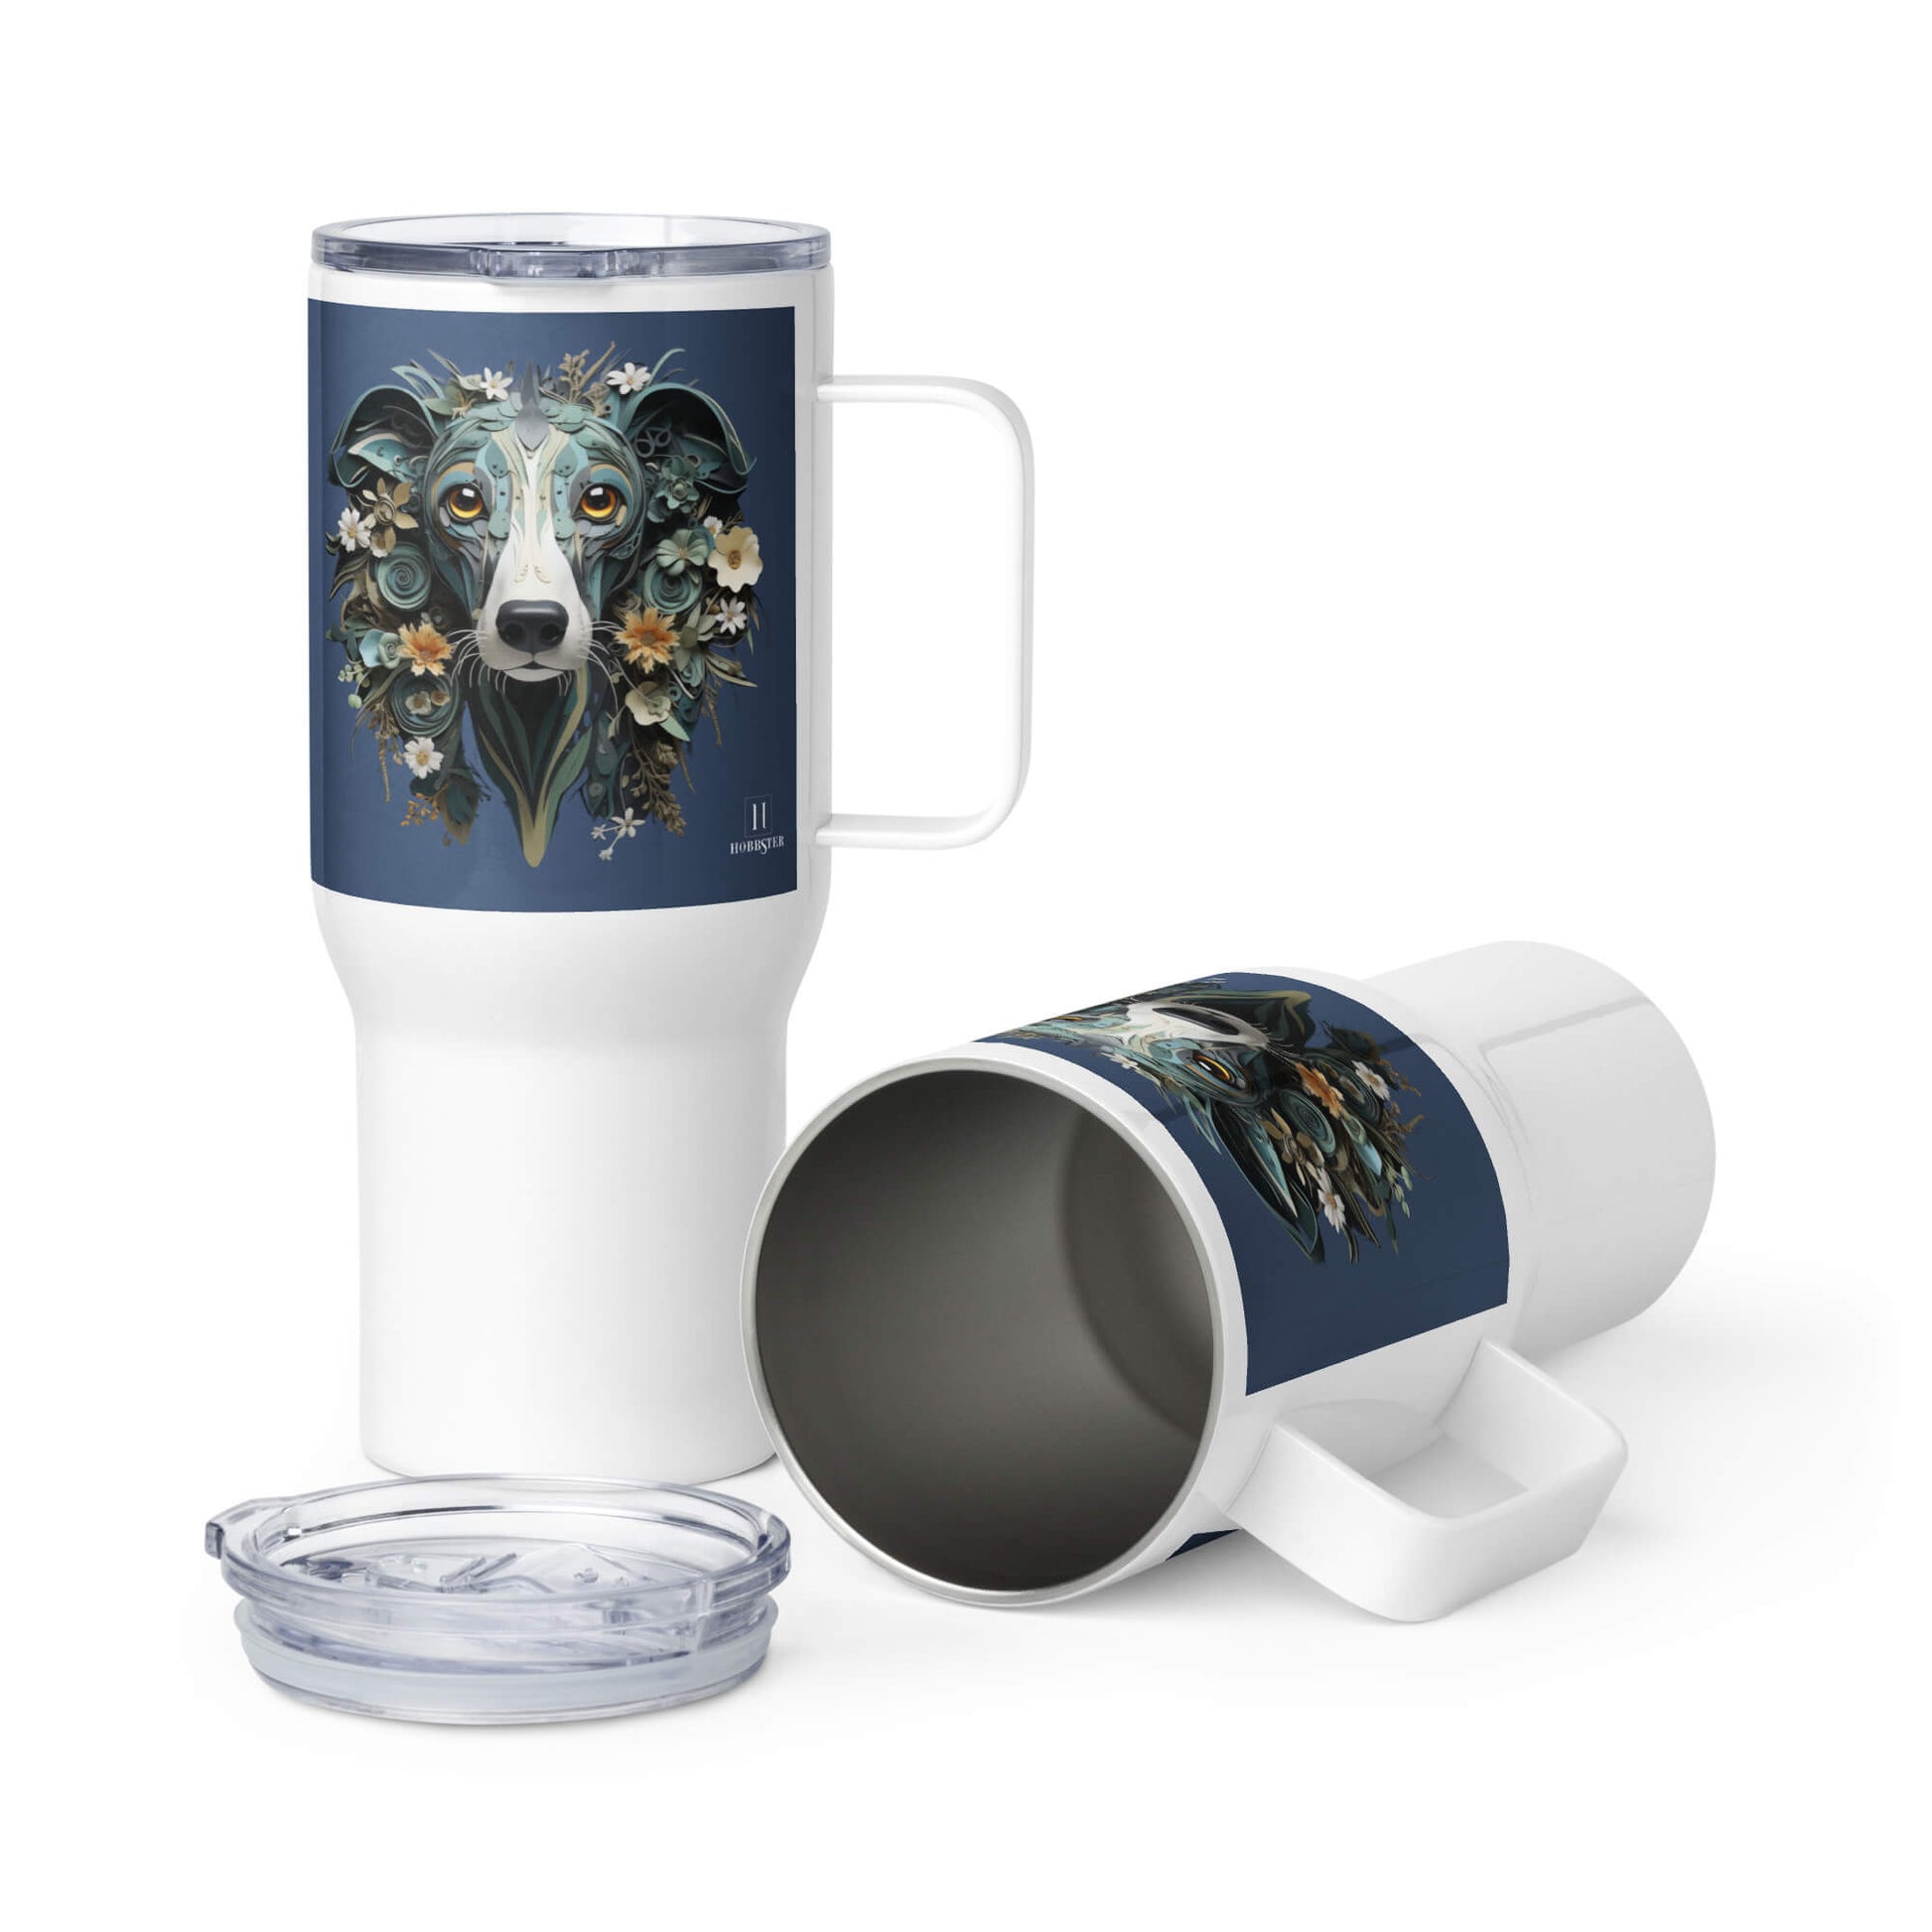 25oz Travel Mug with a Handle - Greyhound Paper Quilling Design - Hobbster